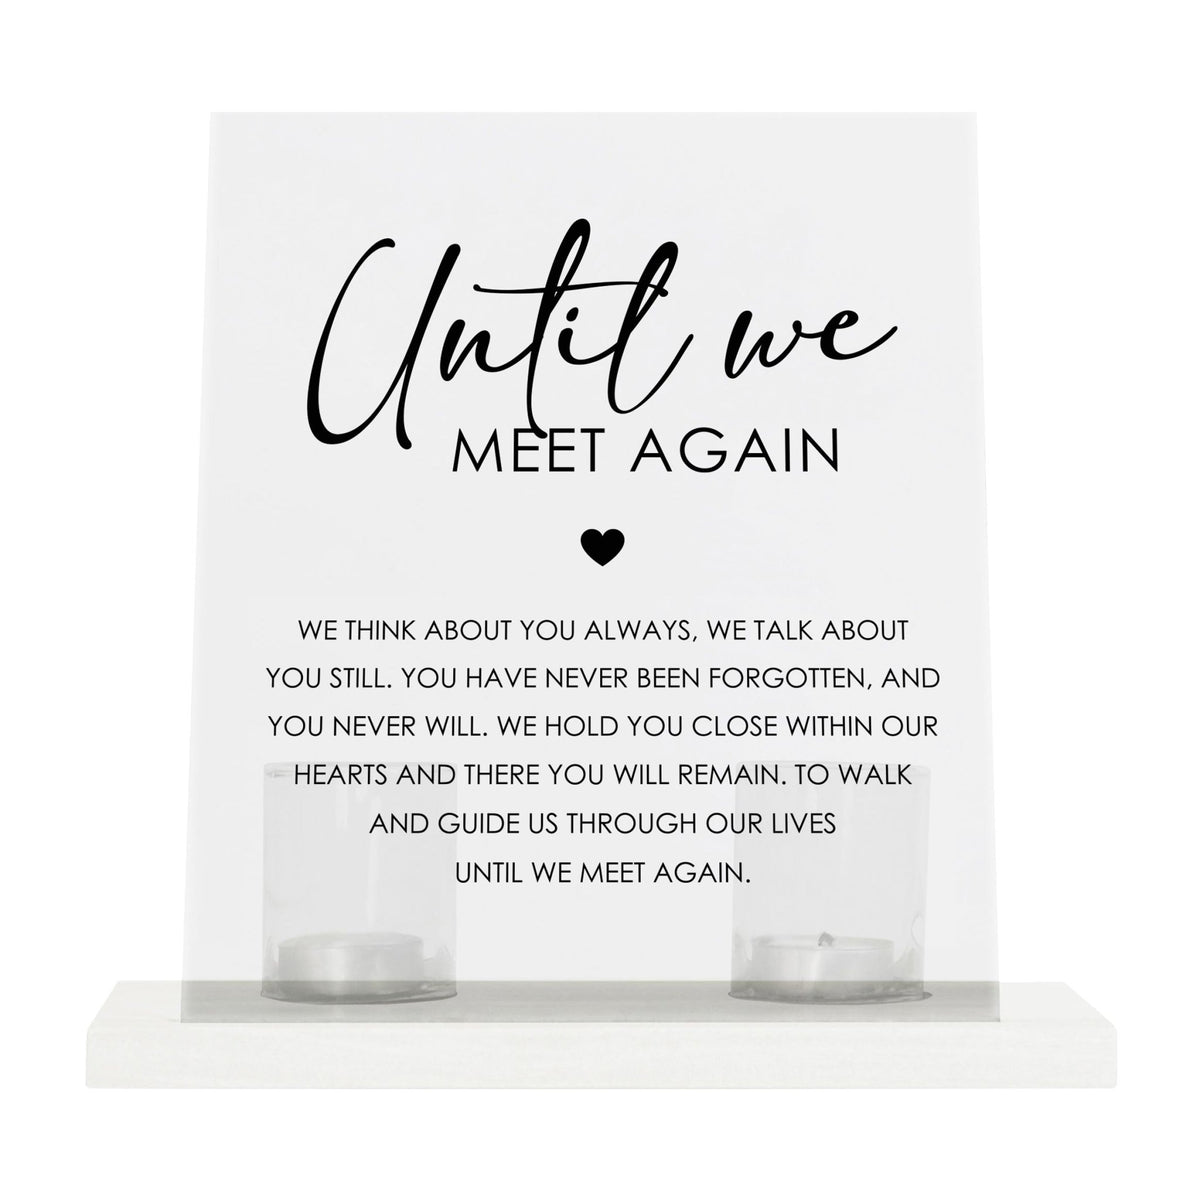 Memorial 8x10 Acrylic Wall Sign with Wooden Base Votive Candle Holder - Until We Meet Again - LifeSong Milestones